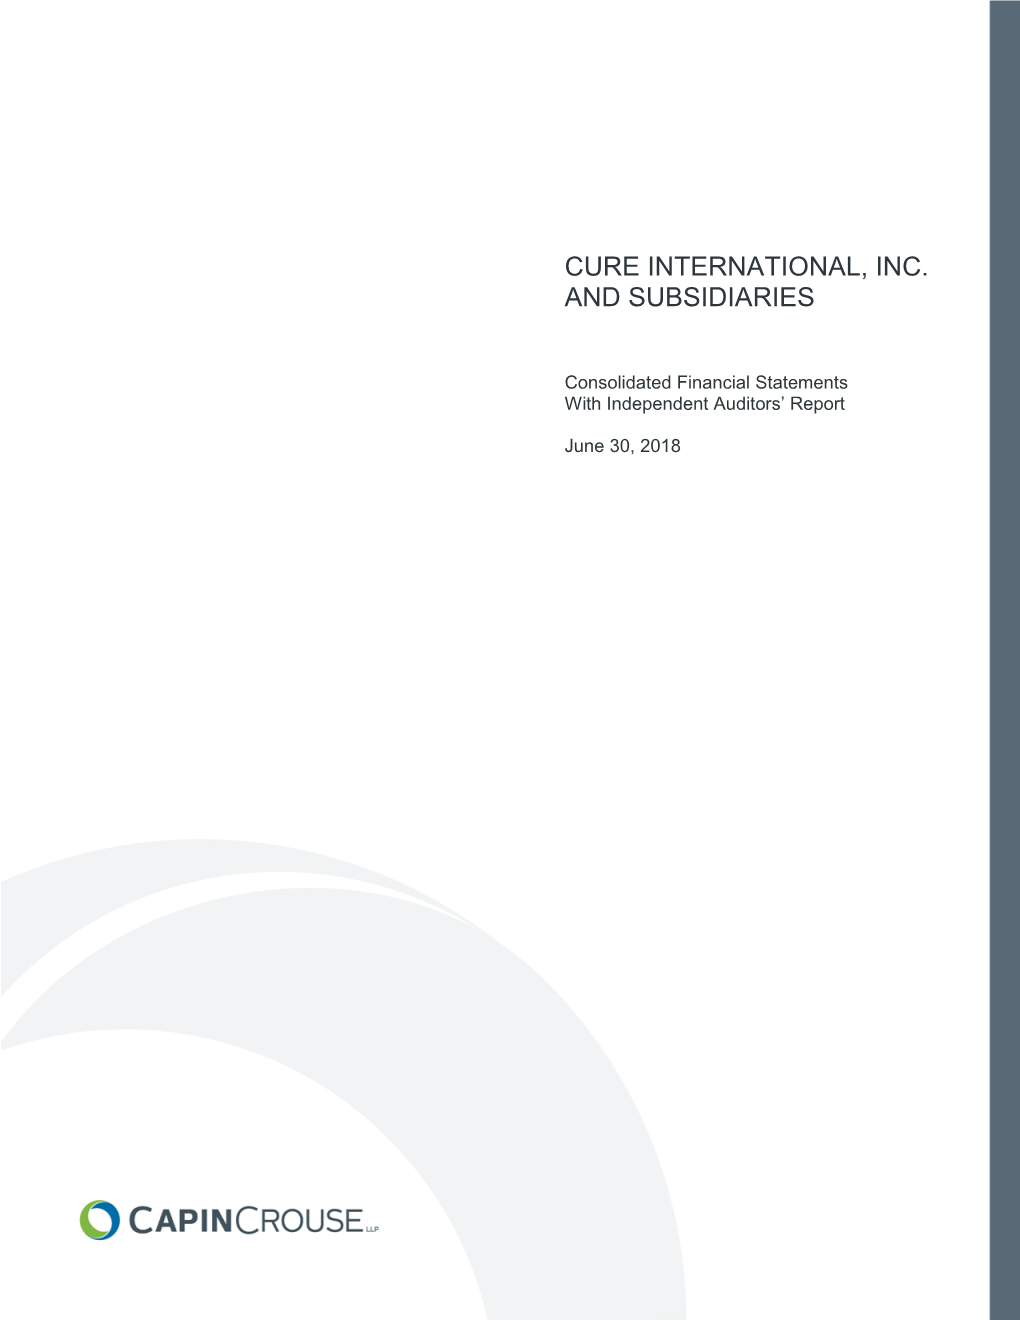 Cure International, Inc. and Subsidiaries